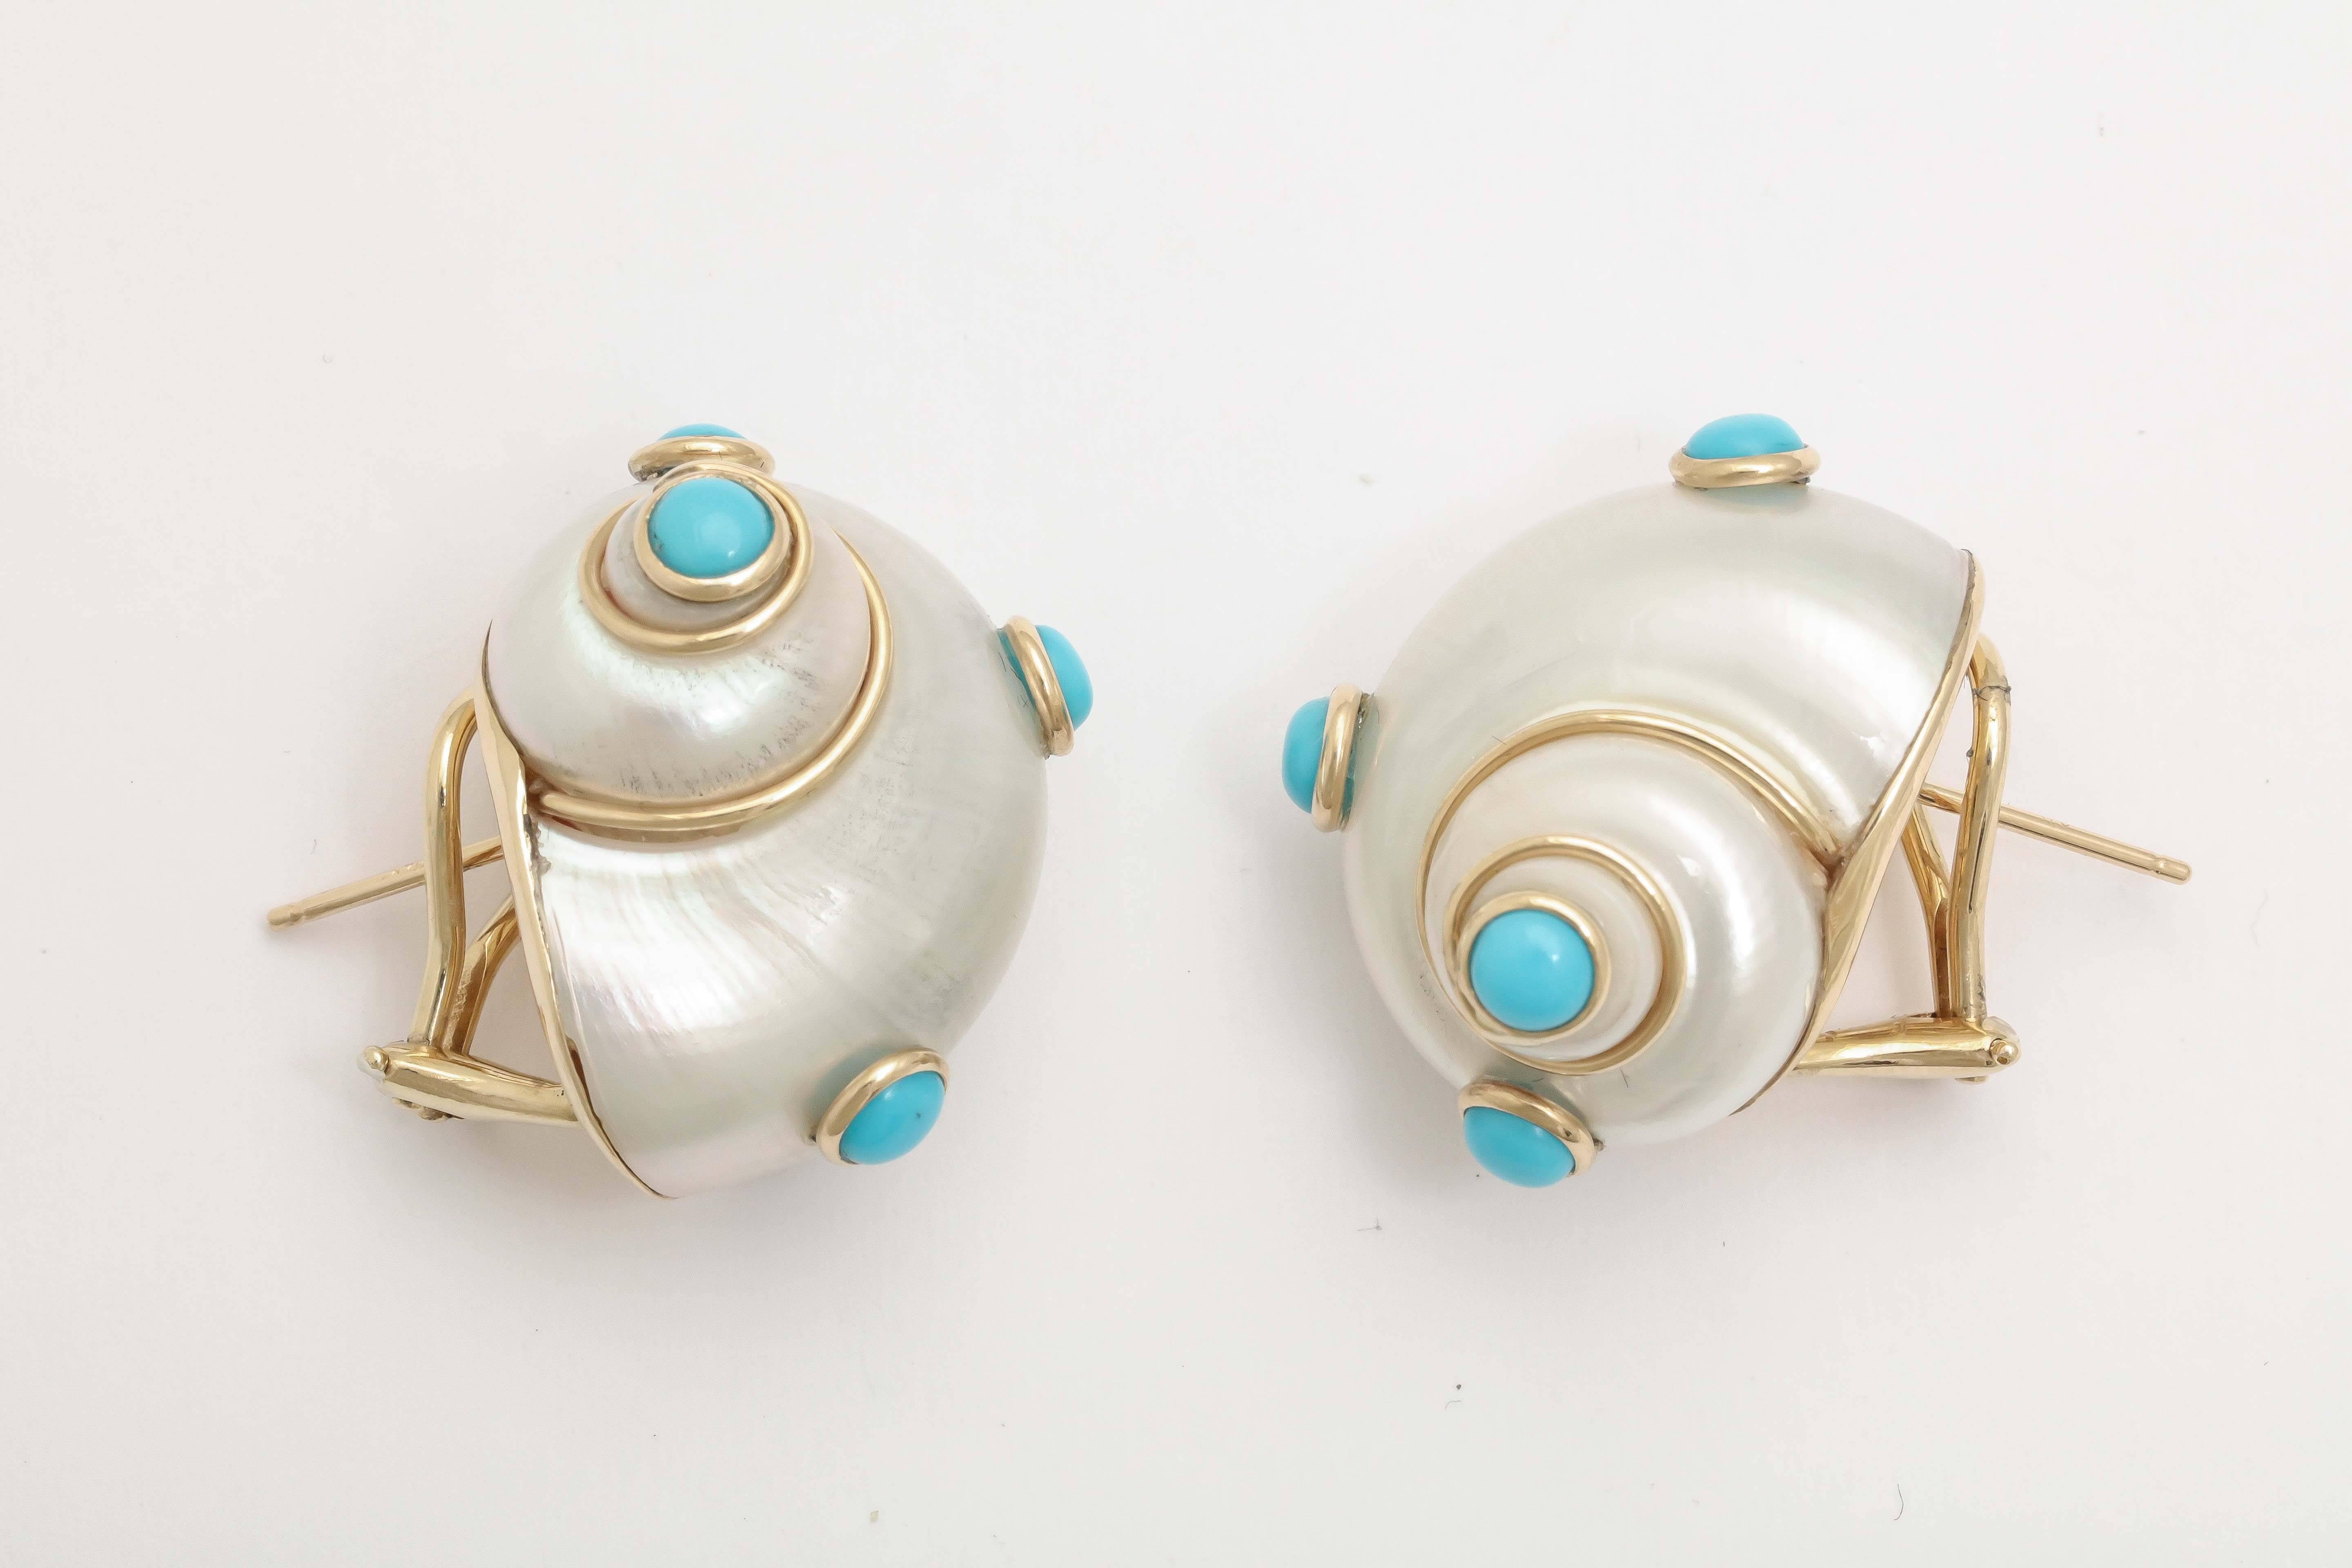 A new twist.  Shell Earrings set in 14t Yellow Gold and bezel set with Cabochon Turquoise Stones.  Left Ear - the Shell goes up, while the Right Ear is oriented with the Shell going down.  Omega backs and pierced, as well.